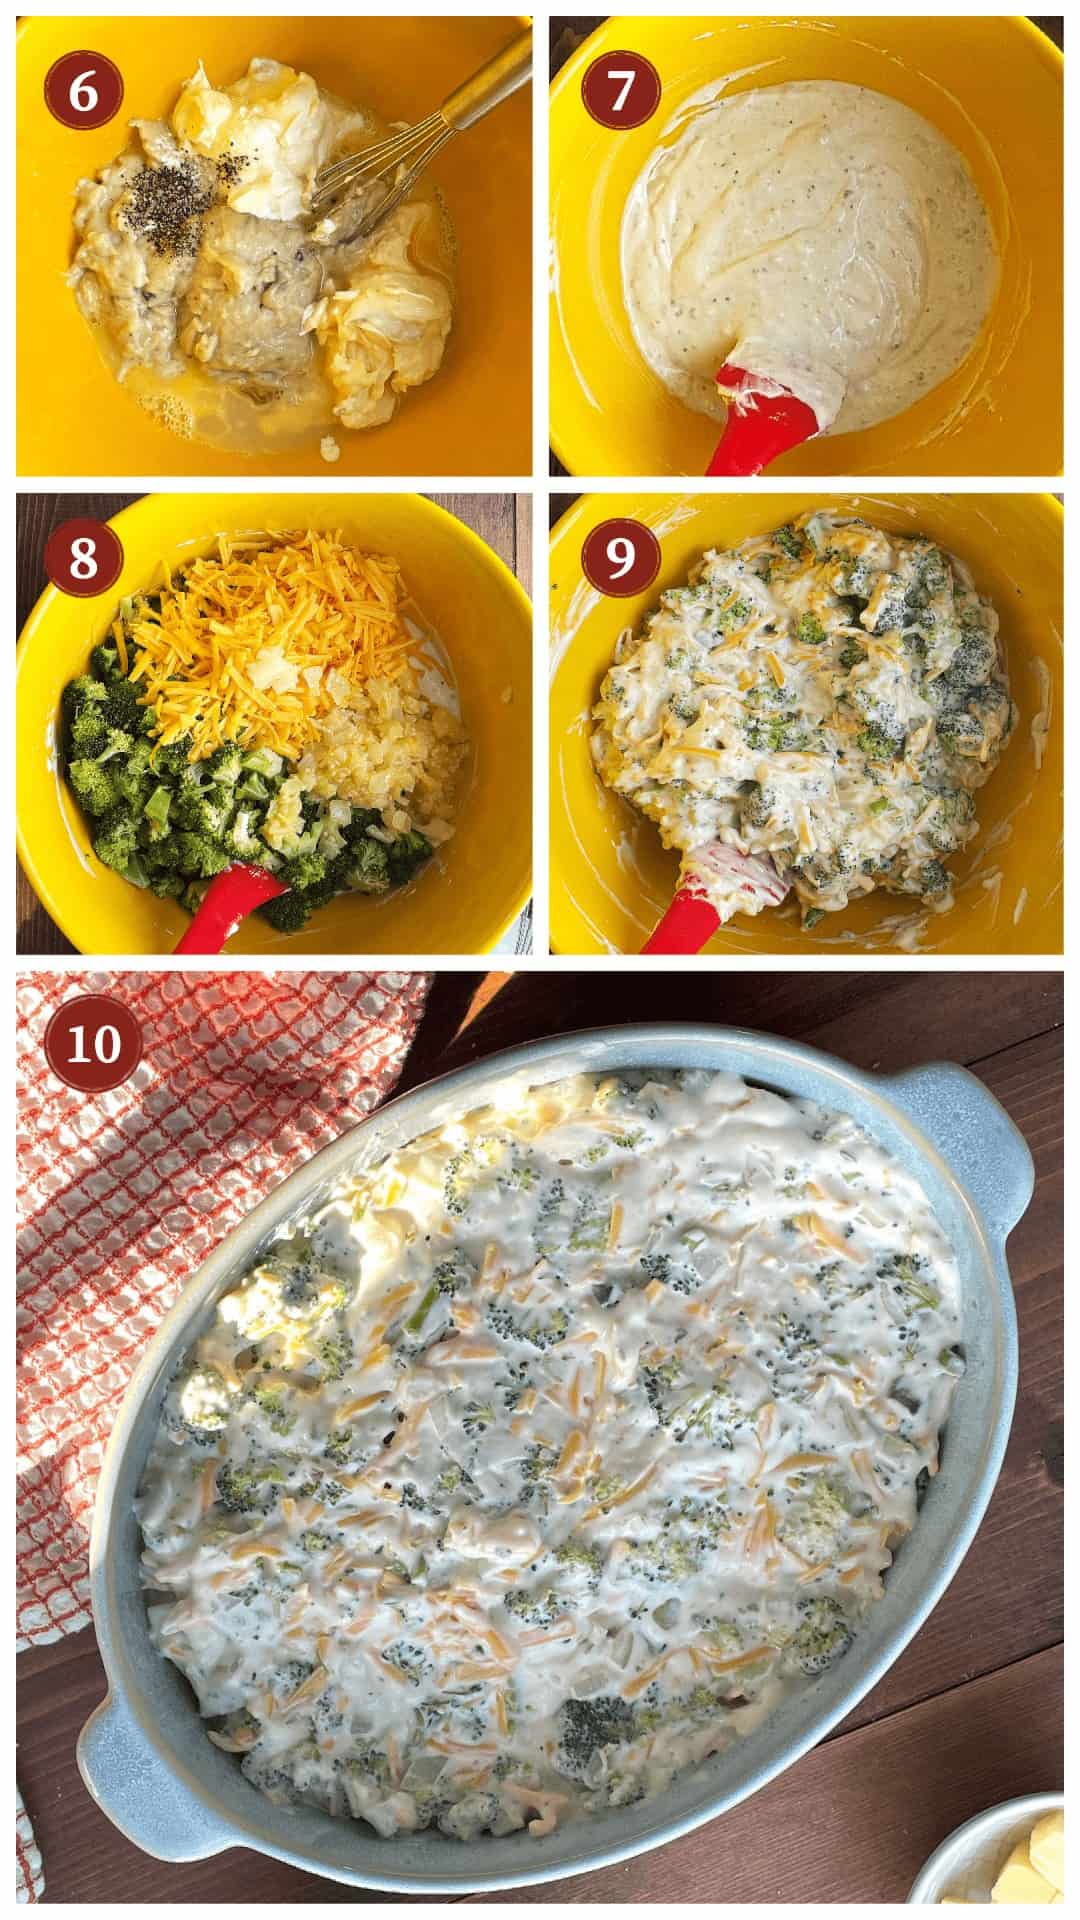 A collage of images showing how to make broccoli casserole, steps 6-10.